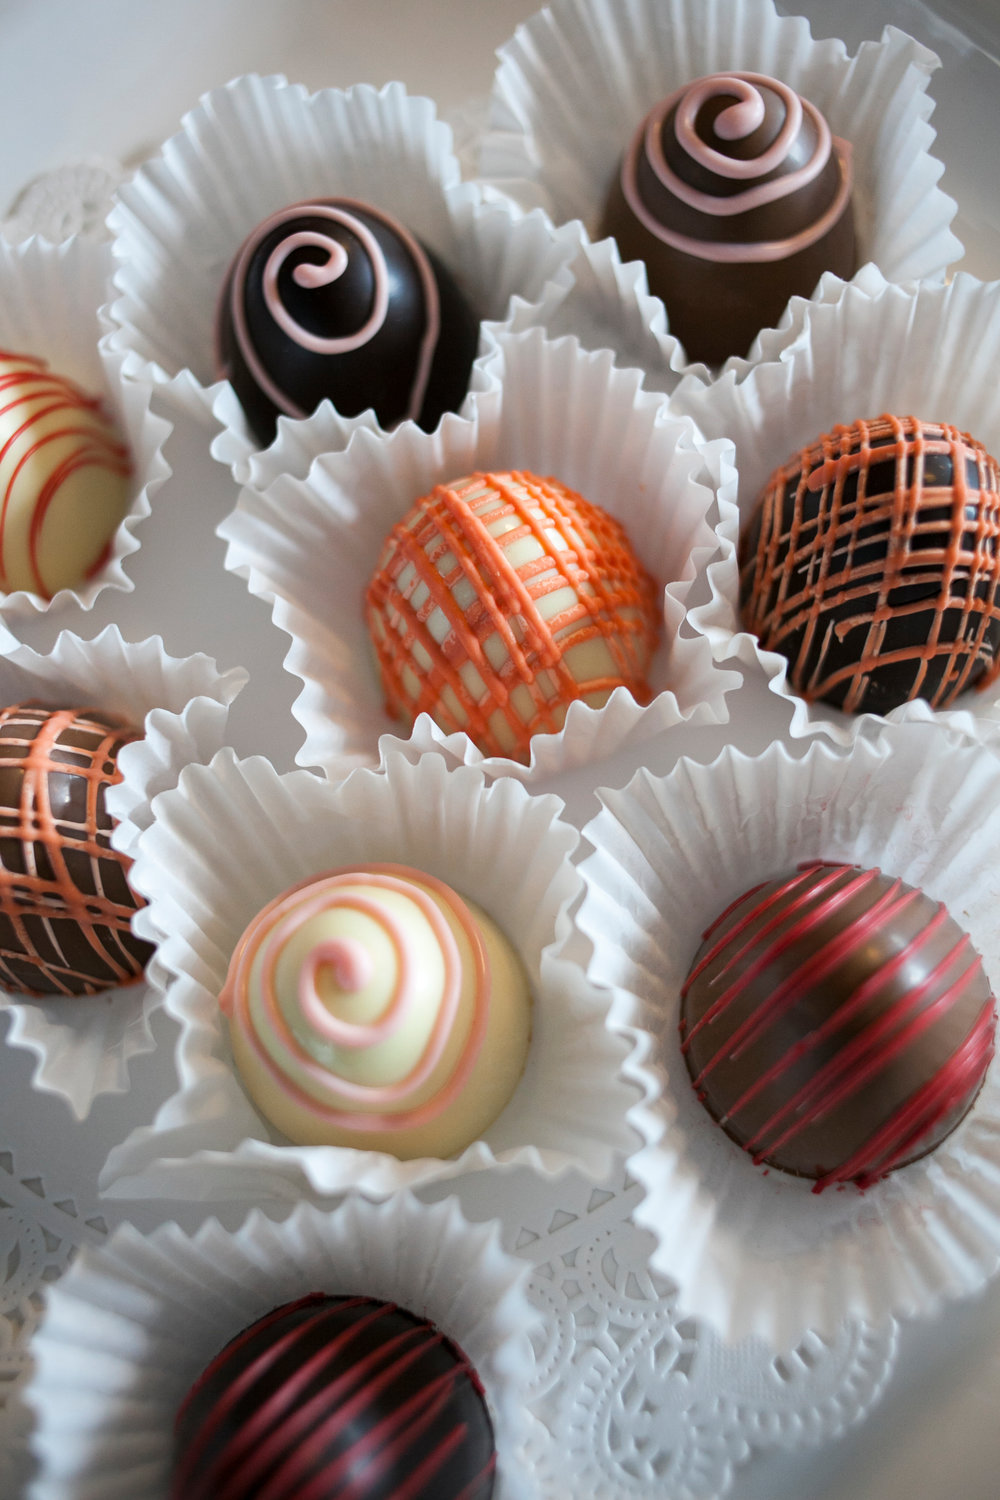 Visitors can sample sumptuous chocolate truffles that are dressed to impressed.